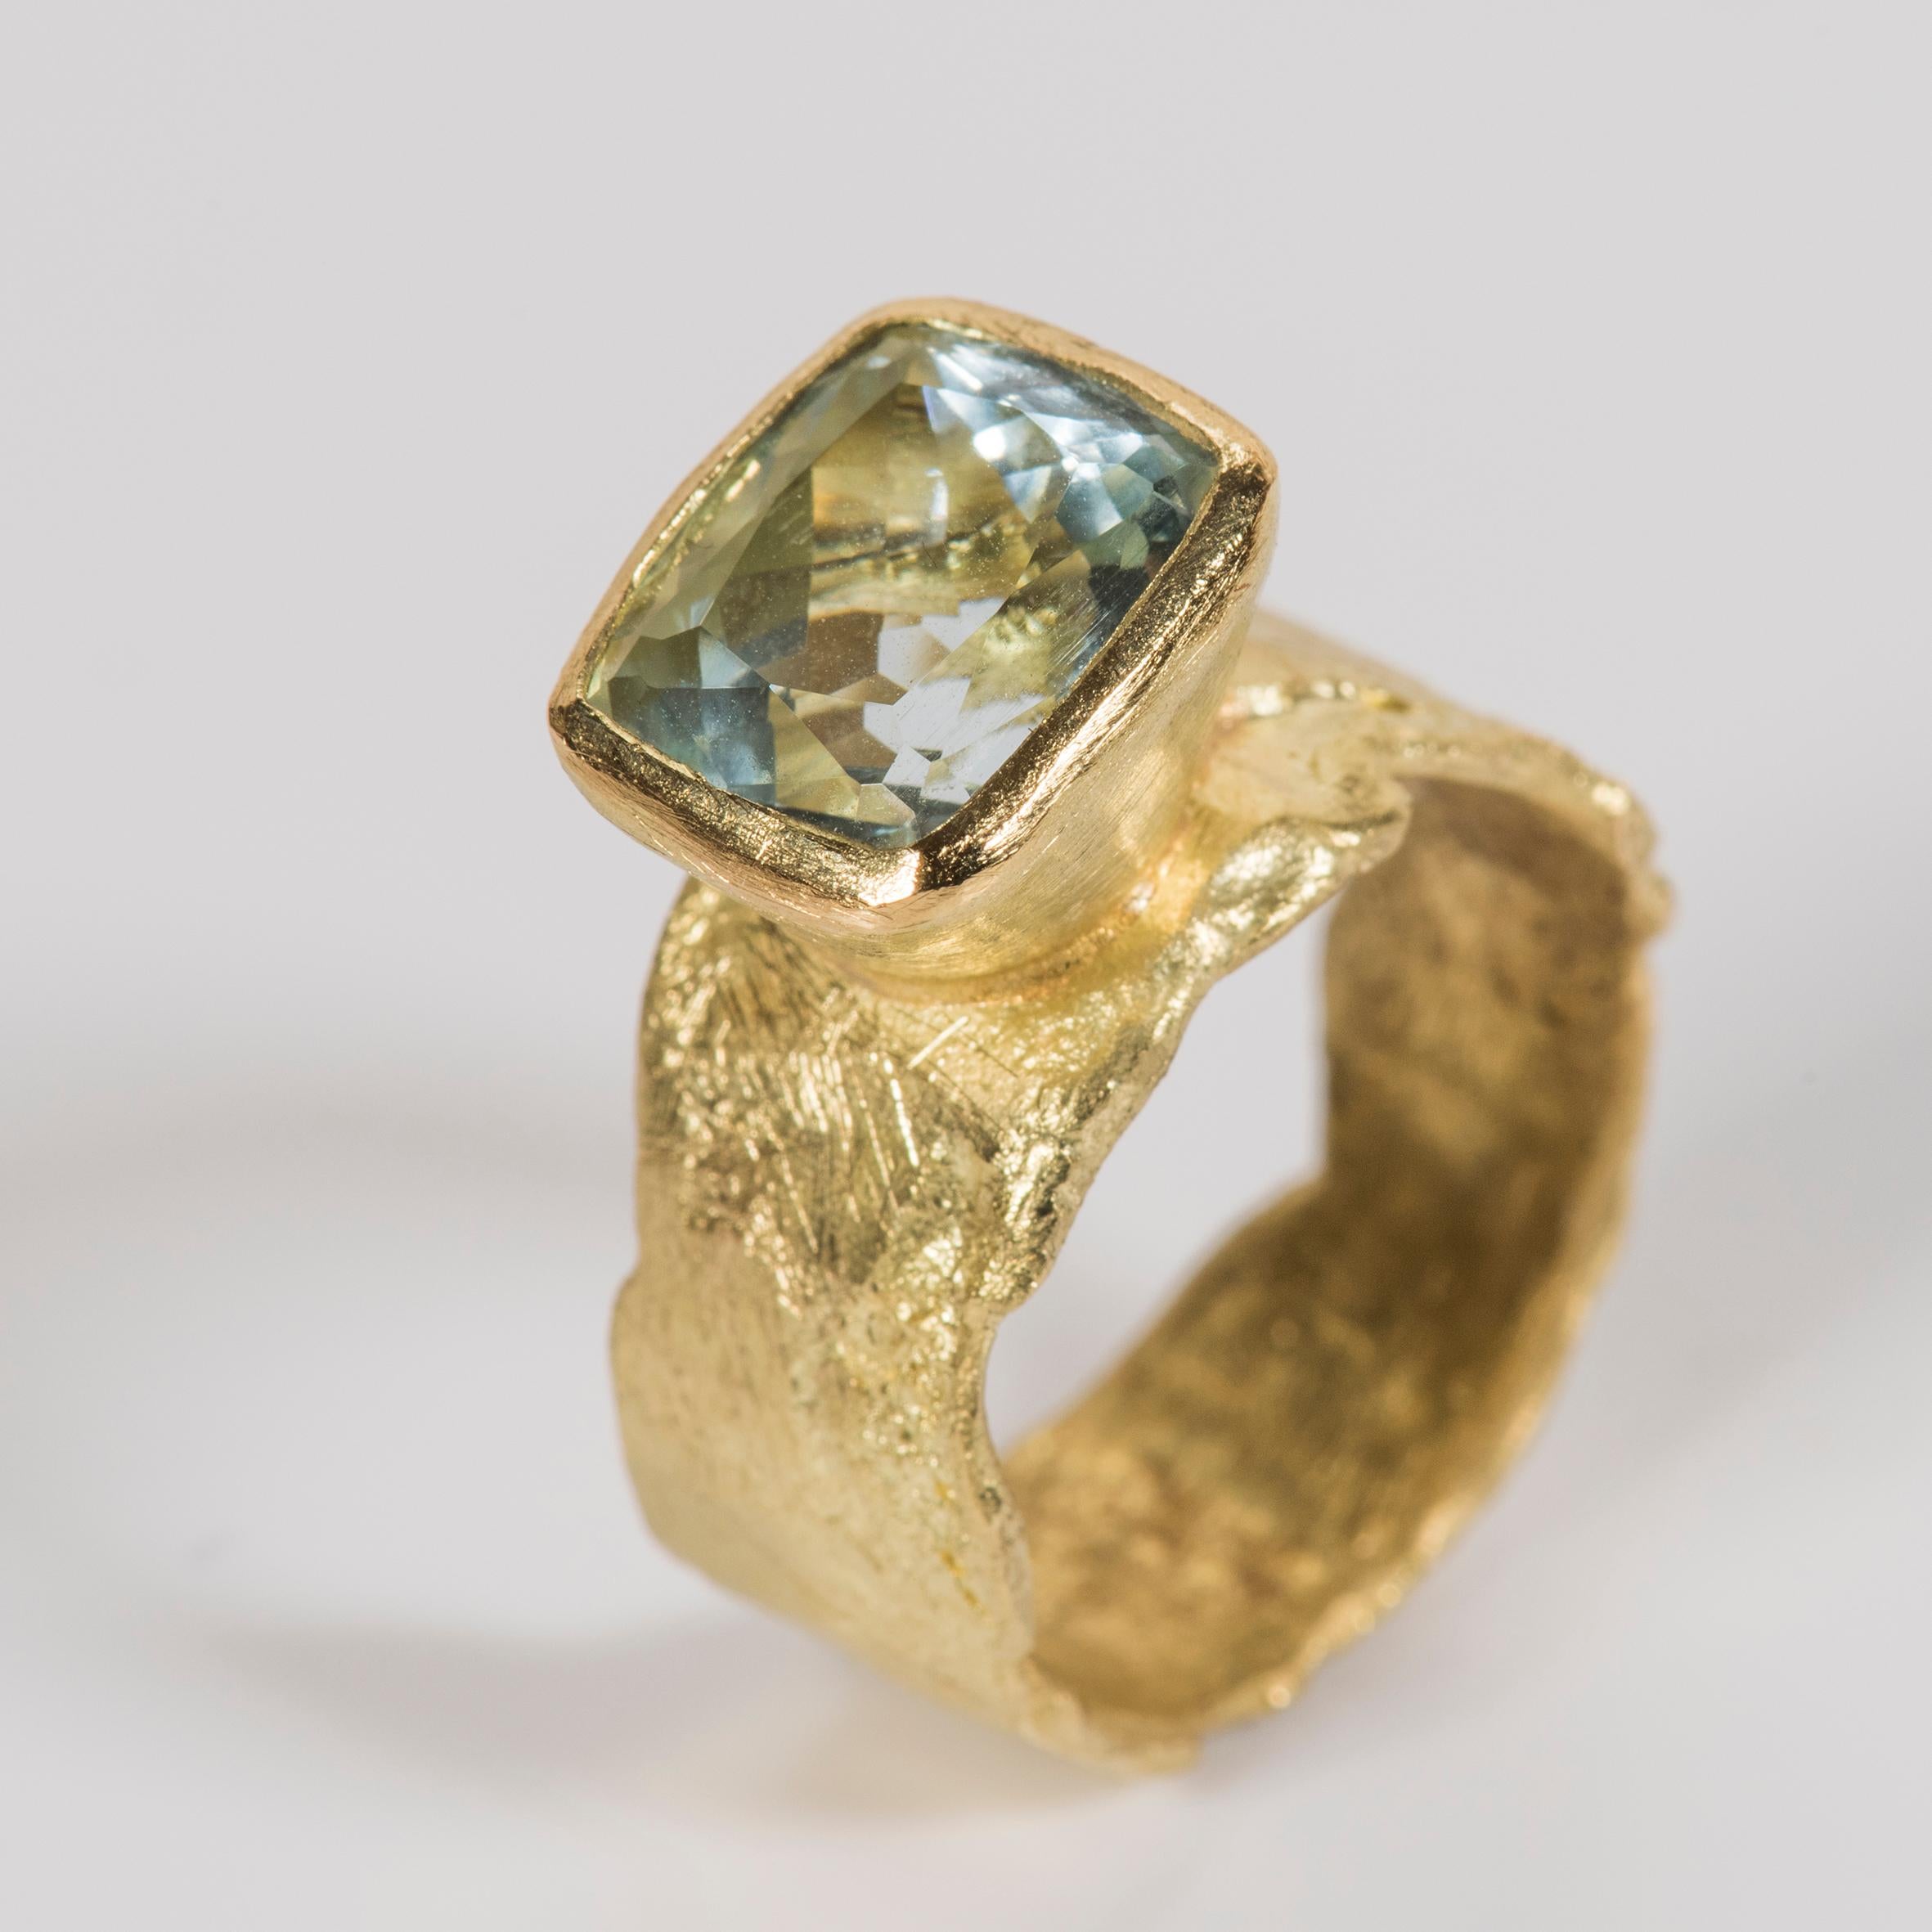 18k gold wide melted organic texture ring with 5ct cushion cut aquamarine. Disa Allsopp handmakes each ring using traditional reticulation and forging techniques. This means each ring has it's own character and unique texture. The aquamarine is